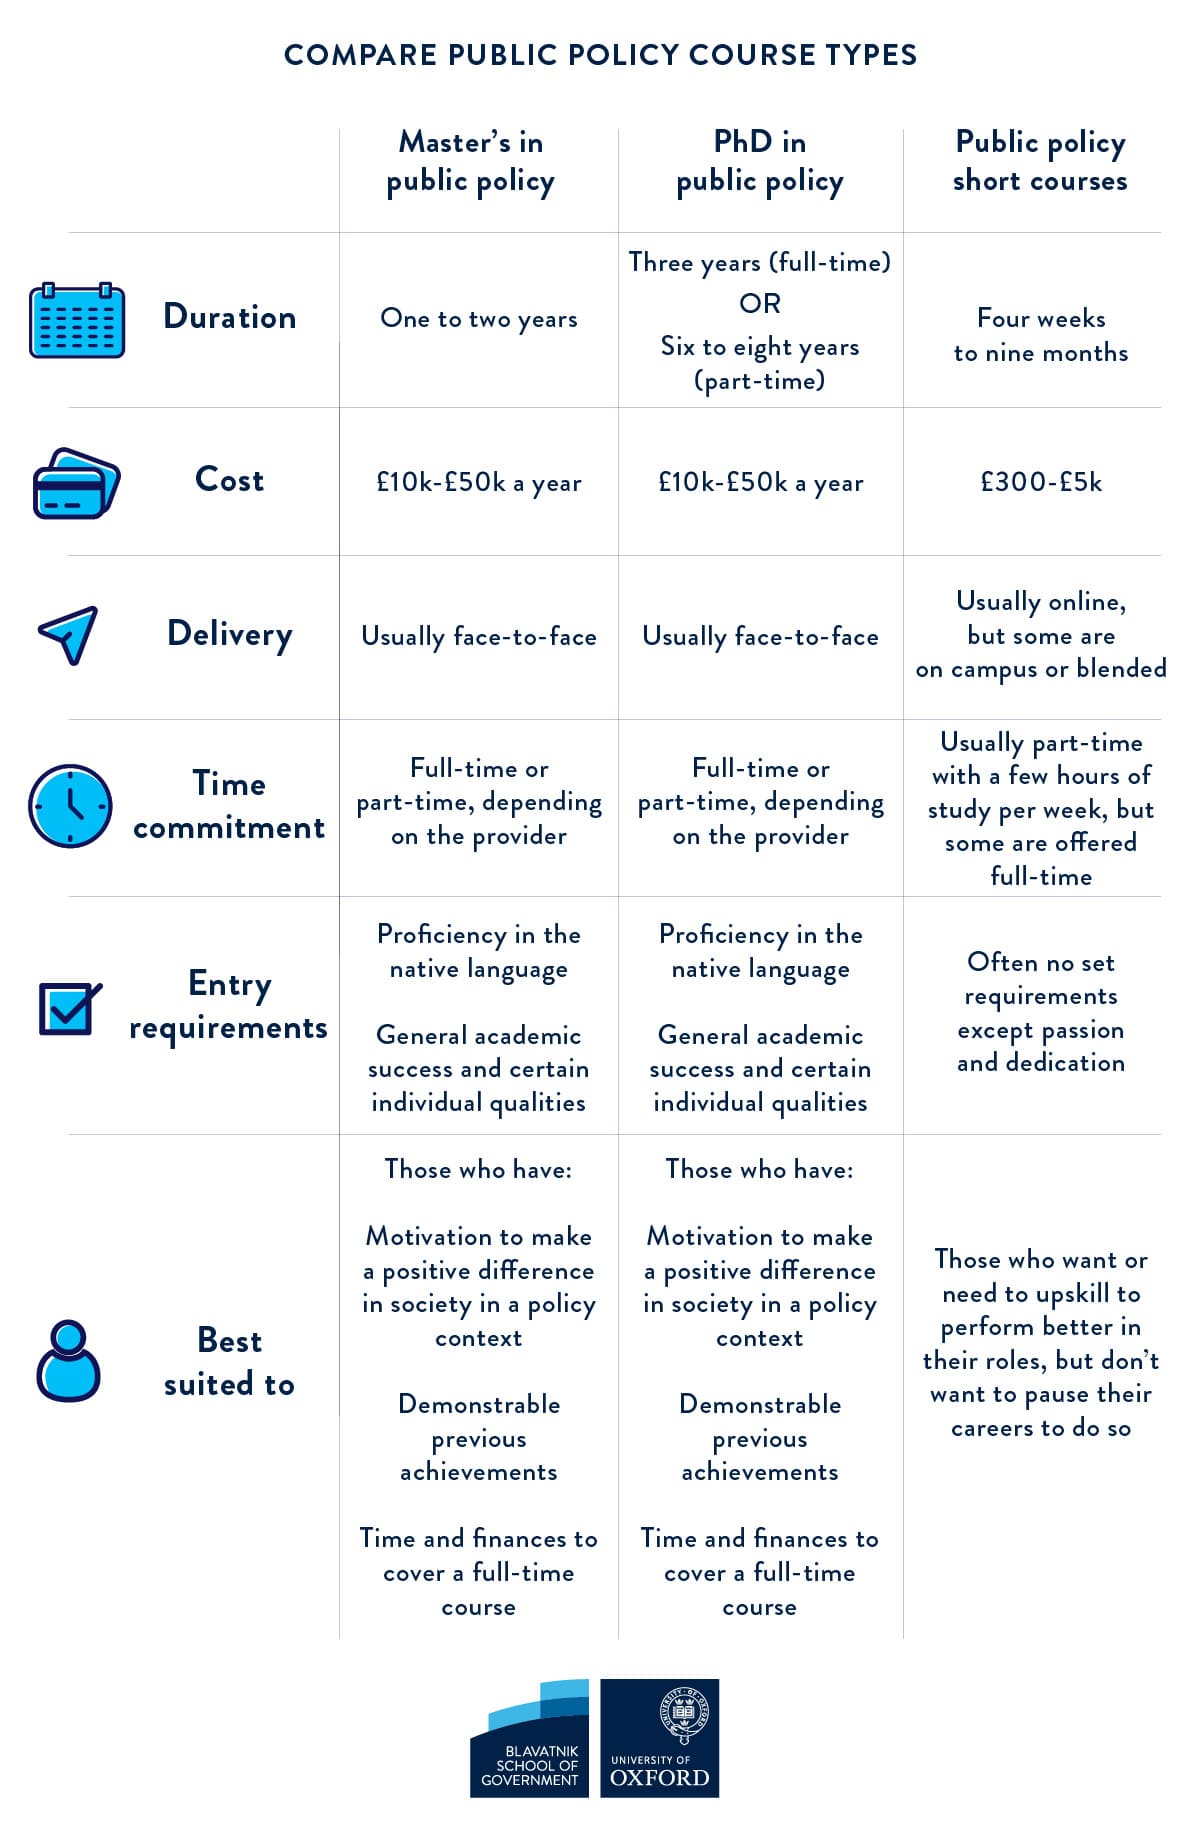 Infographic table comparing the different public policy course types, split into duration, cost, delivery, time commitment, entry requirements and best suited applicants with accompanying icons.